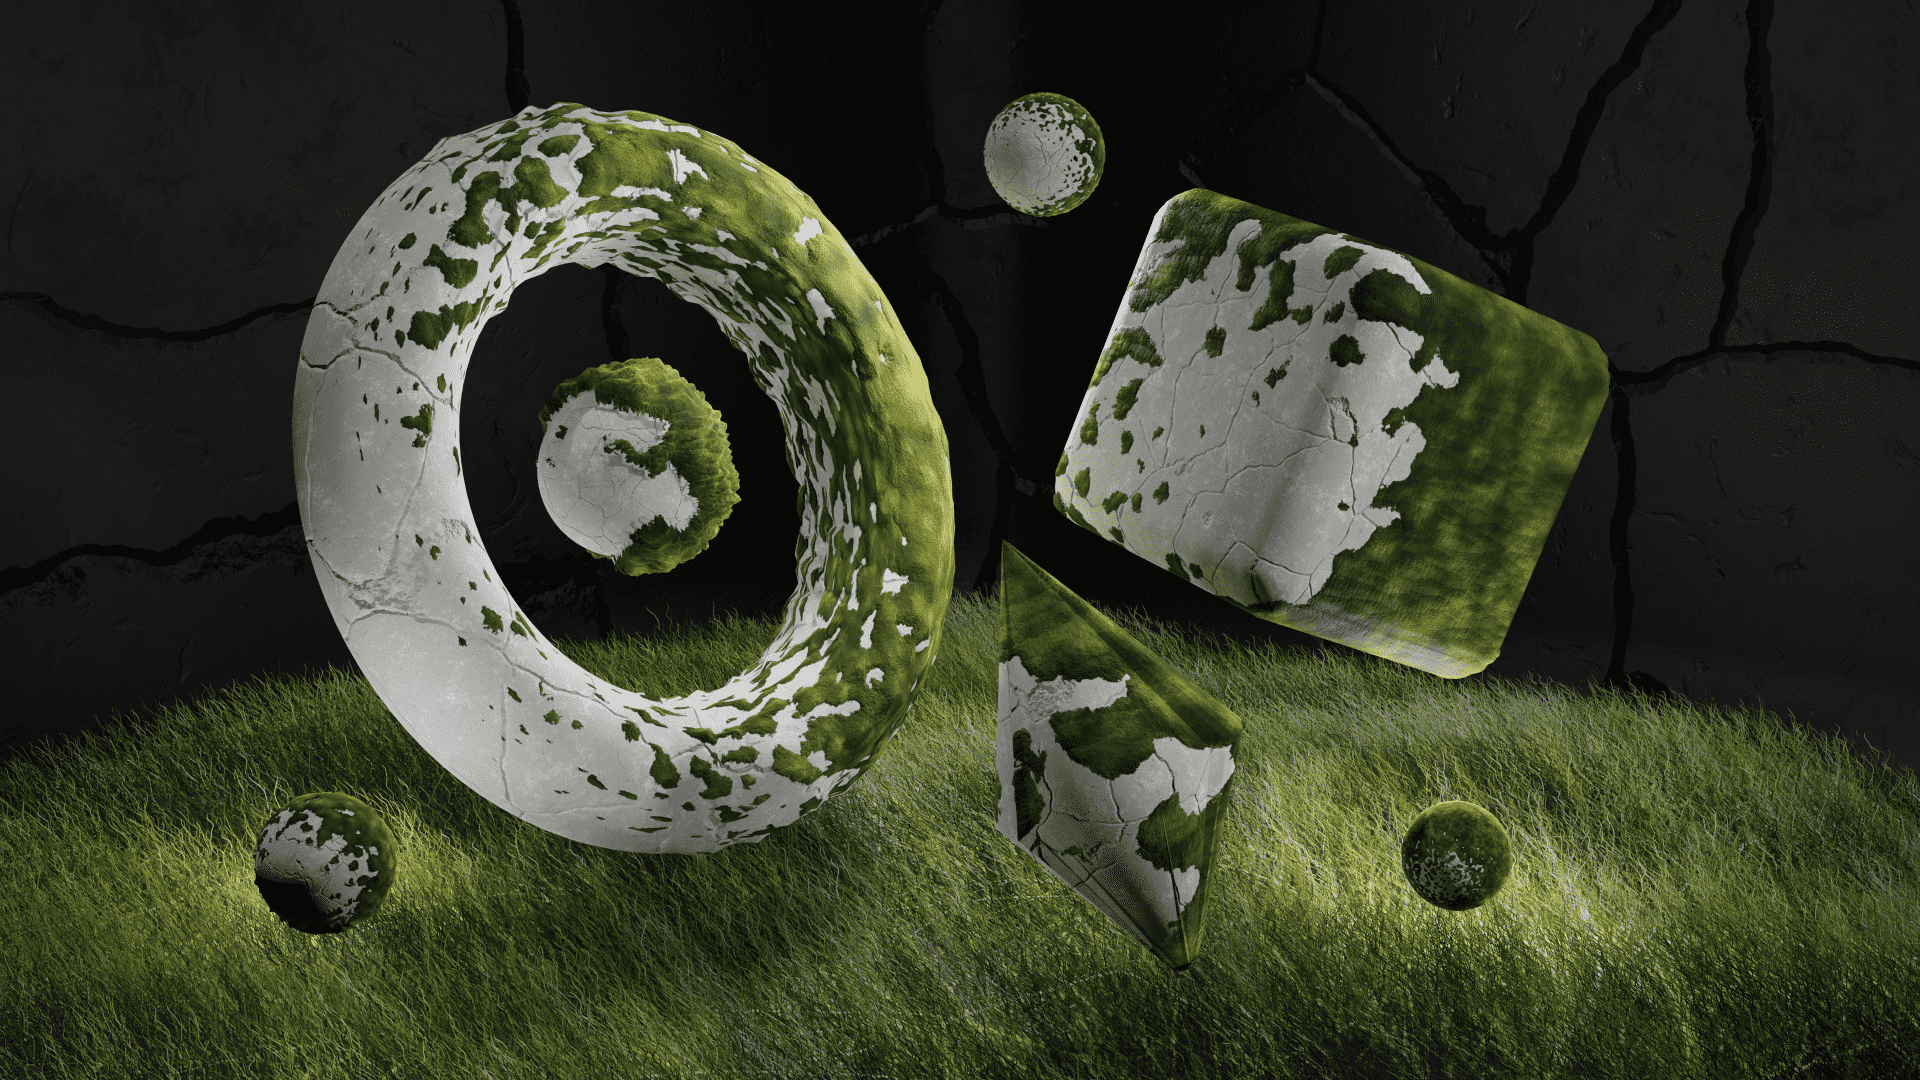 A floating collection of basic geometric shapes with moss growing on them in a cave-like room with glowing grass. There is a torus with a sphere in the middle, a cube with rounded edges, a double-edged cone, and 3 other floating spheres.